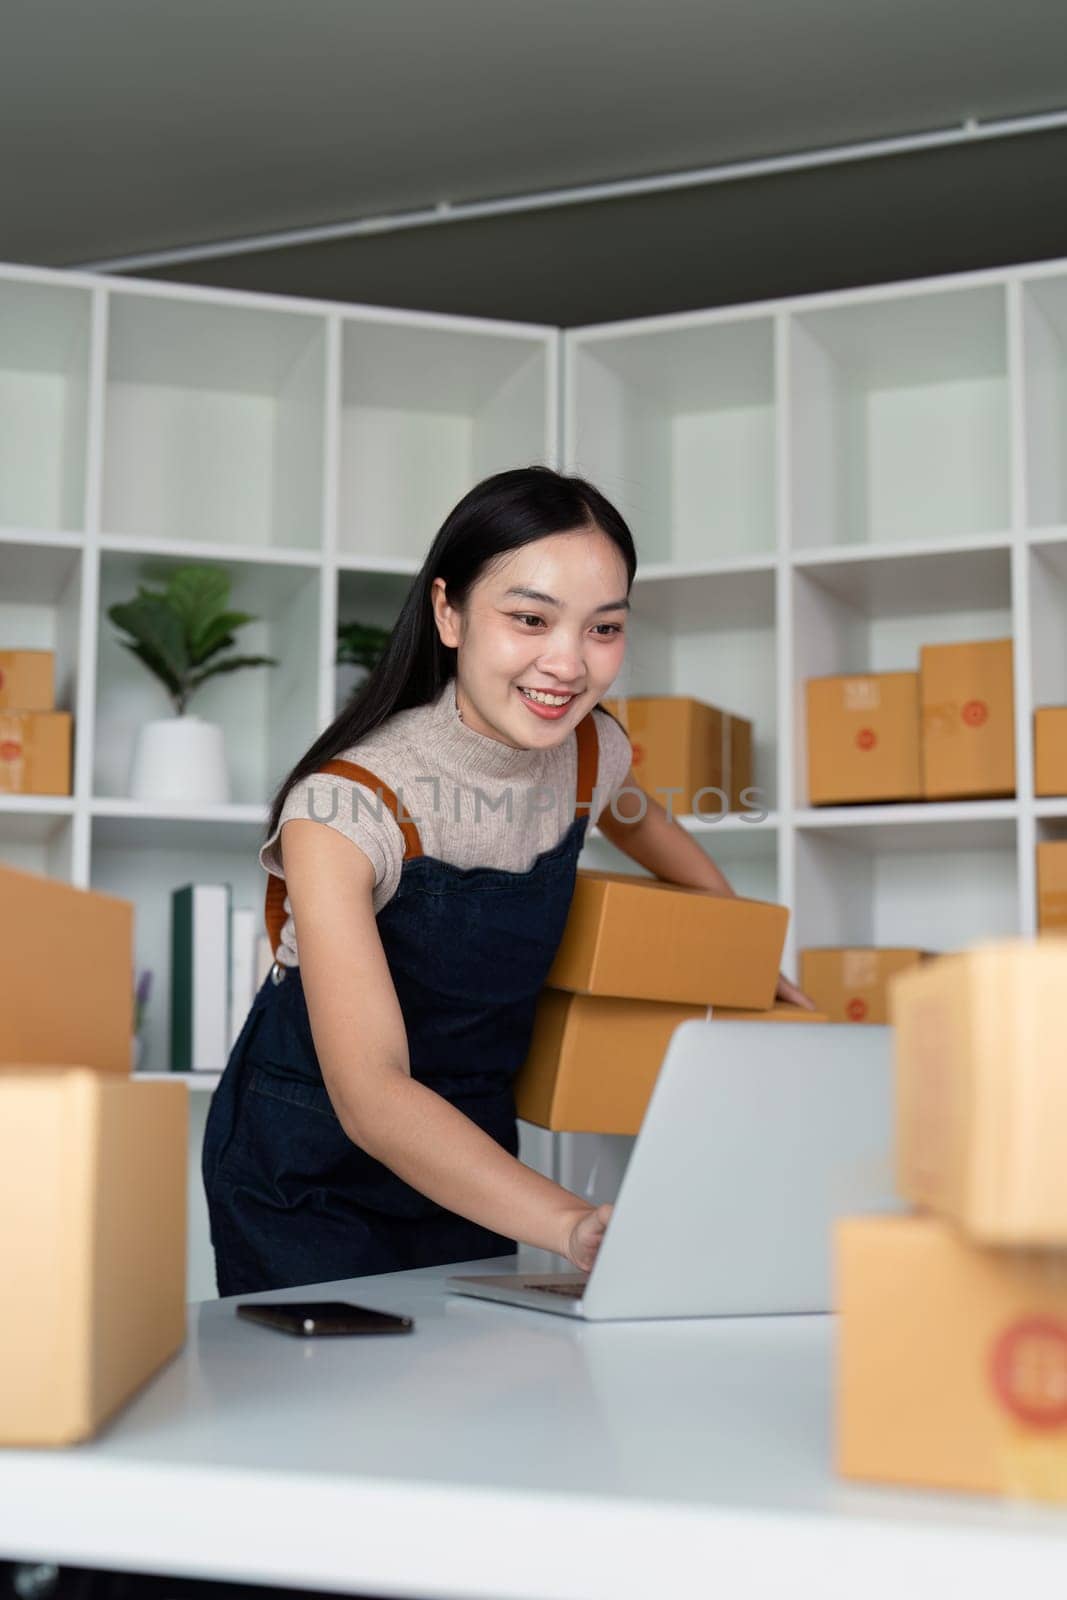 Startup small business entrepreneur of freelance Asian woman using laptop and box to receive and review order online to prepare to pack sell to customer, online business ideas by nateemee